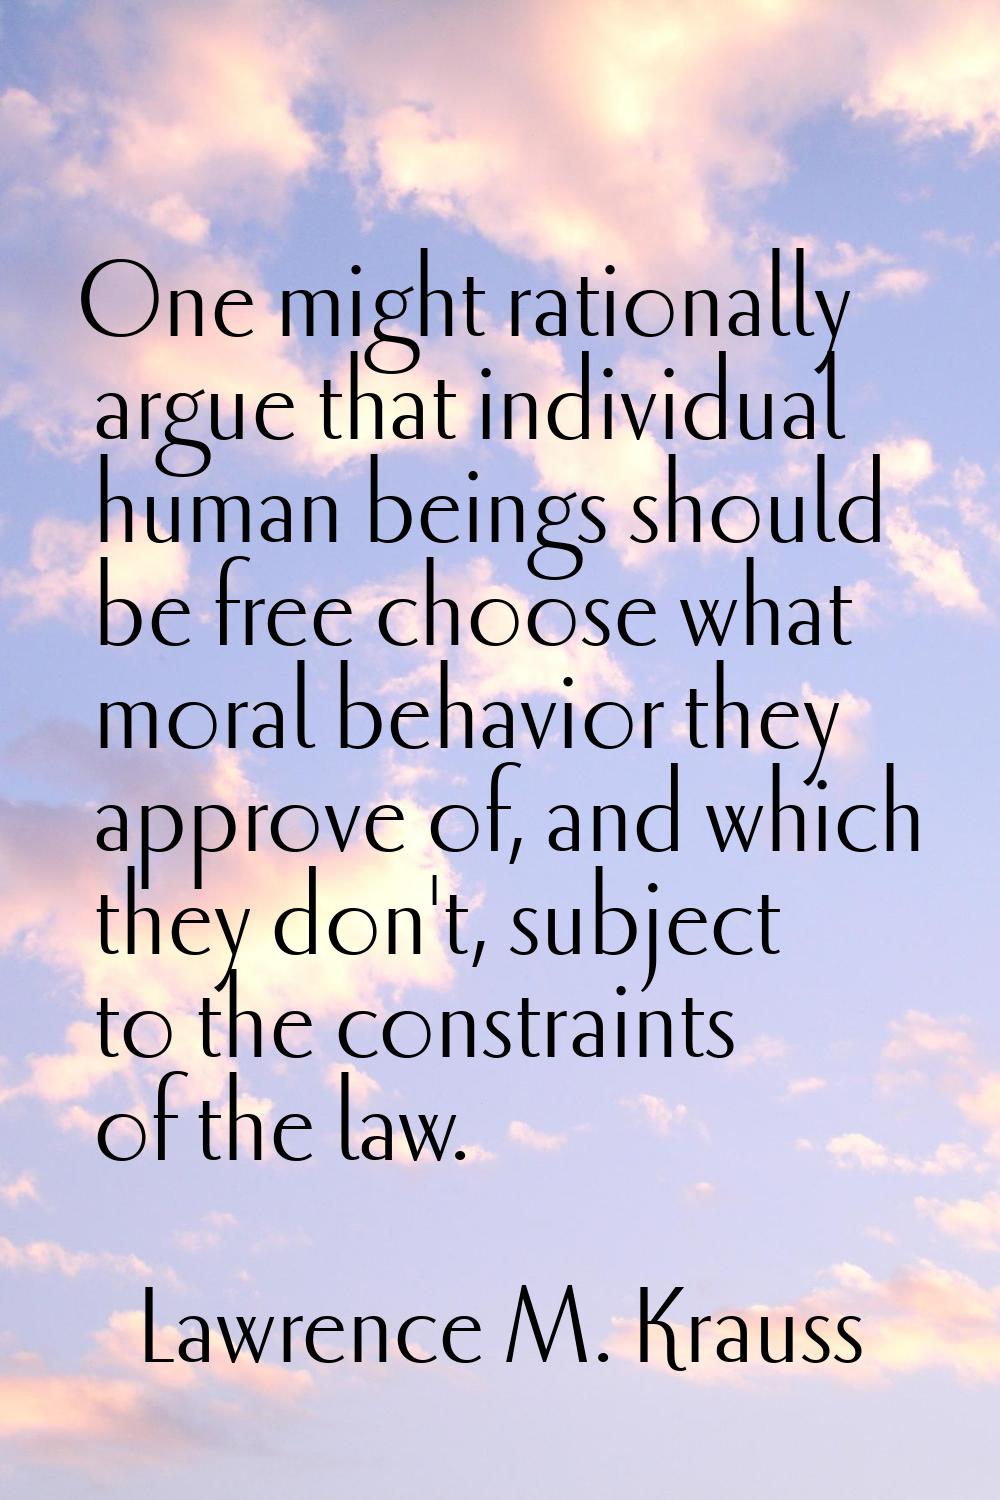 One might rationally argue that individual human beings should be free choose what moral behavior t